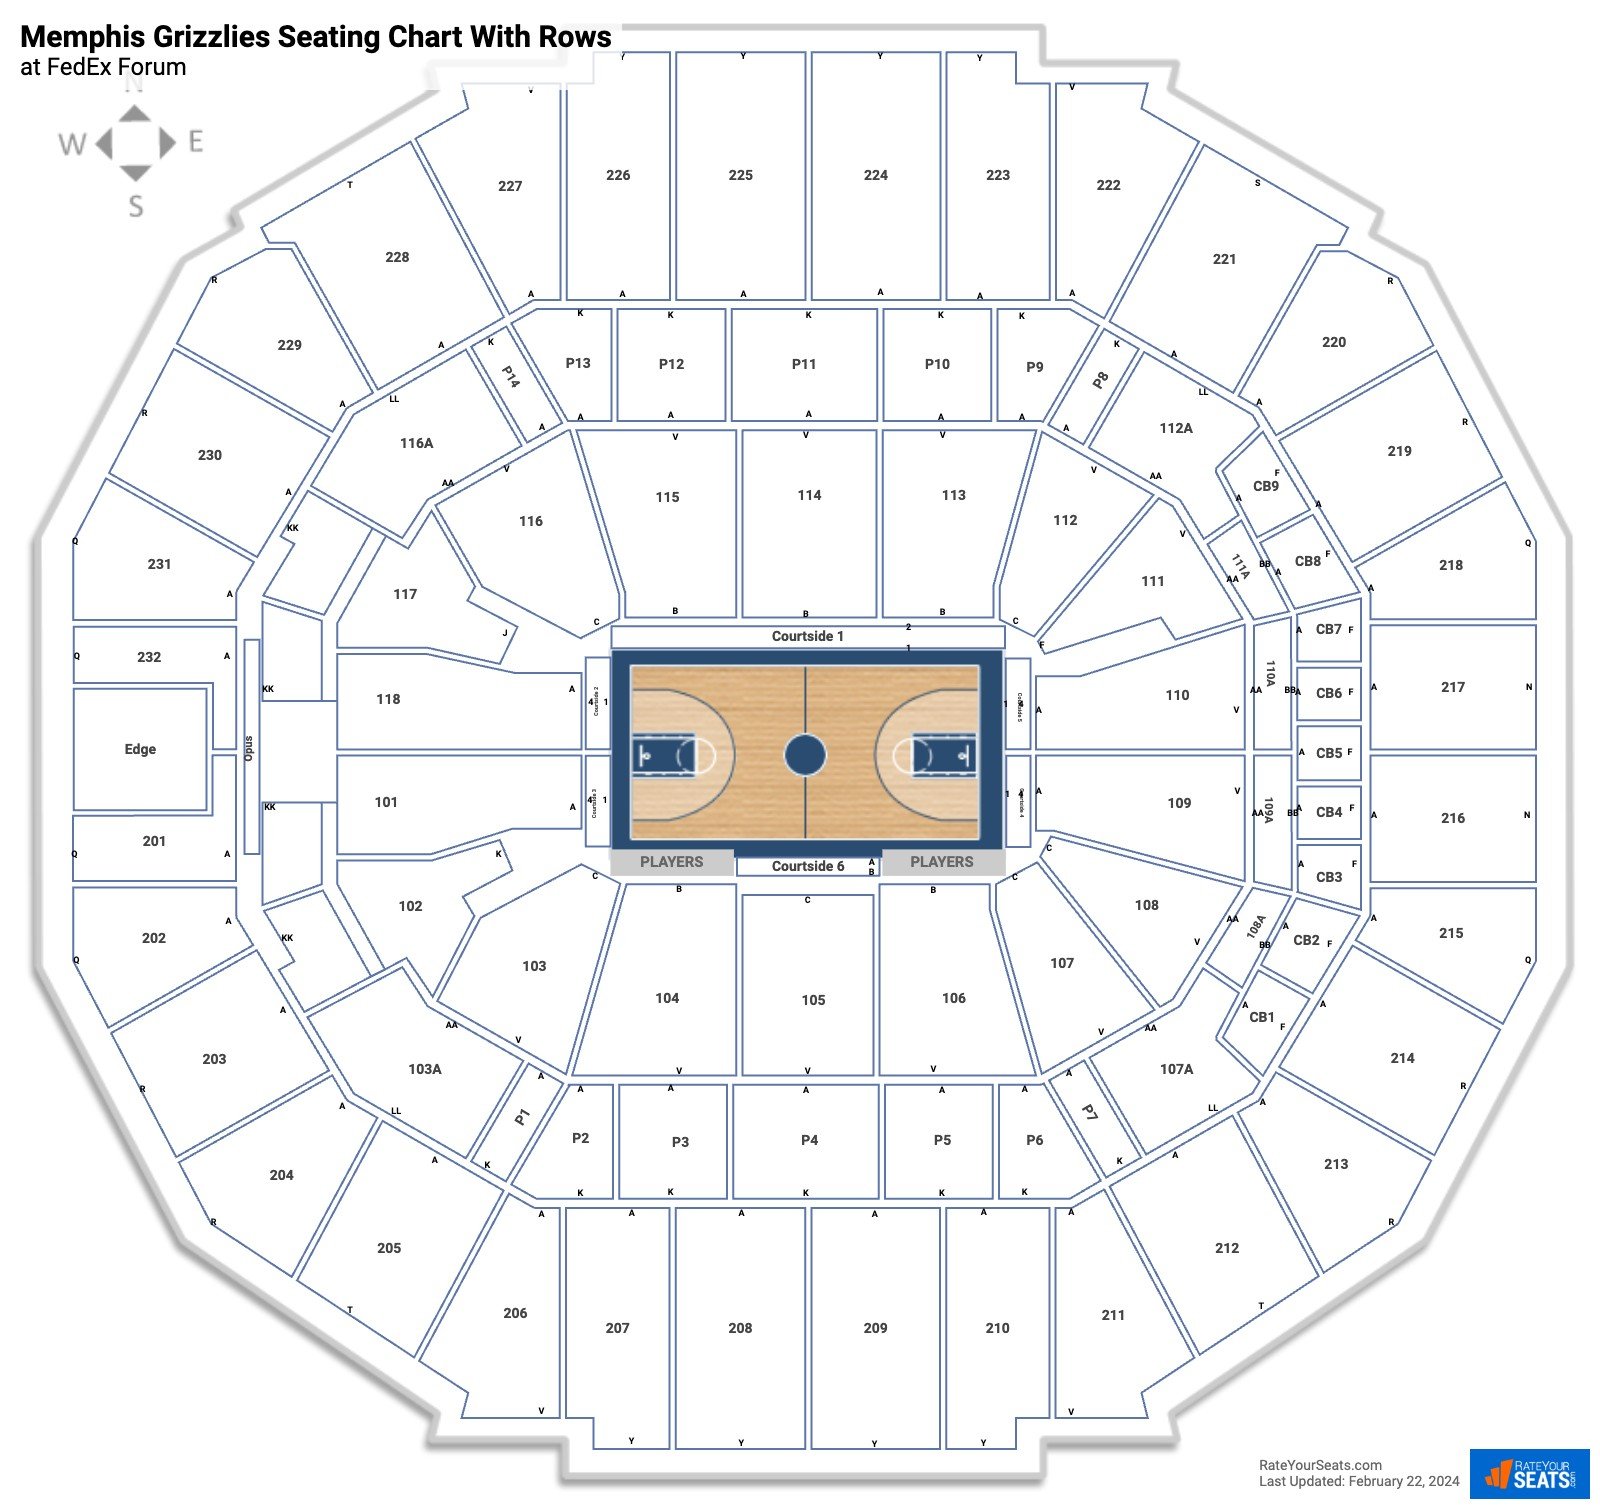 FedEx Forum seating chart with row numbers